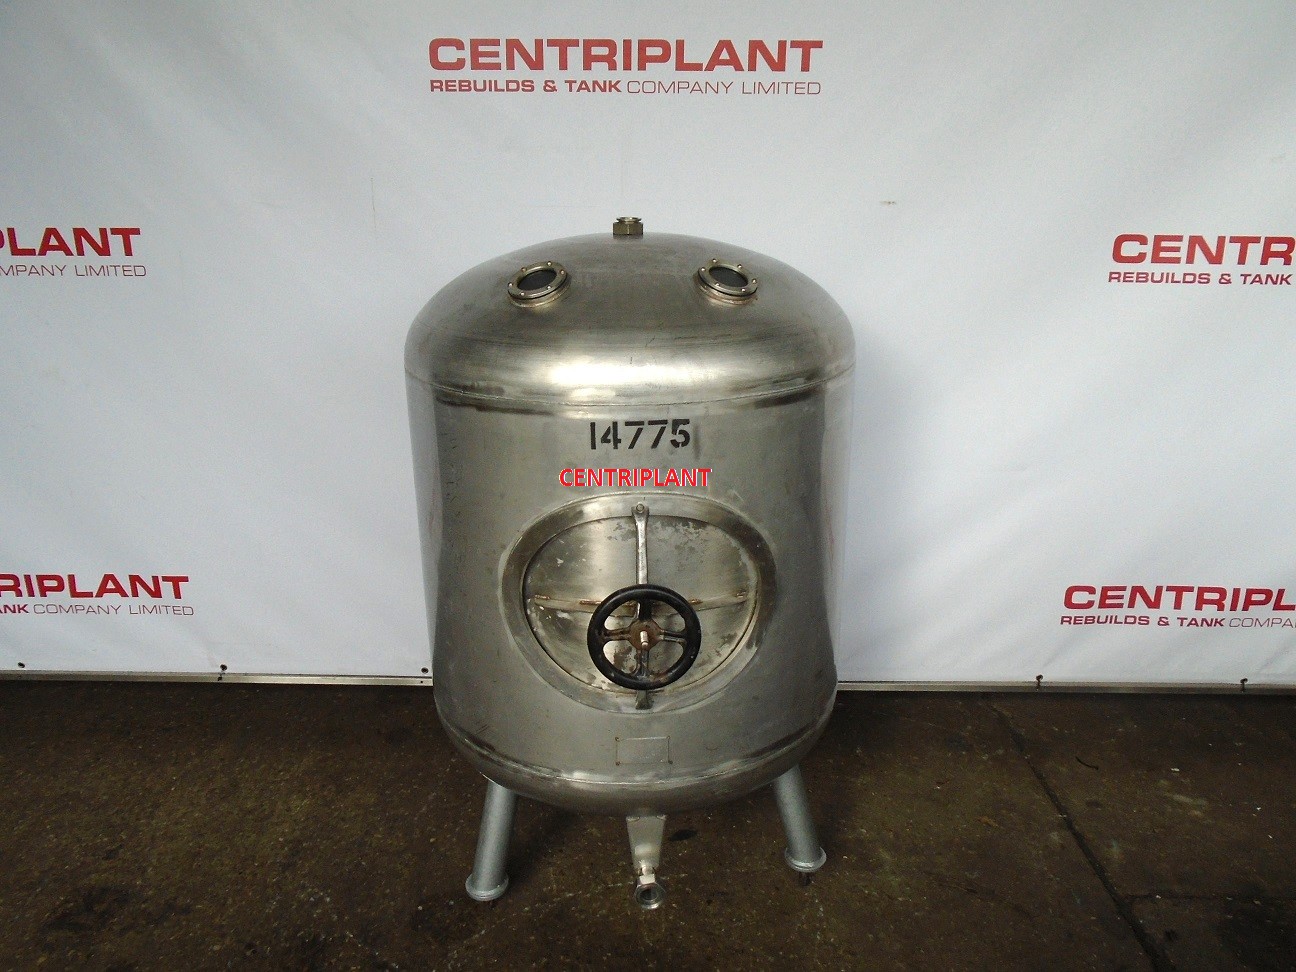 14775 - 810 LITRE STAINLESS STEEL TANK